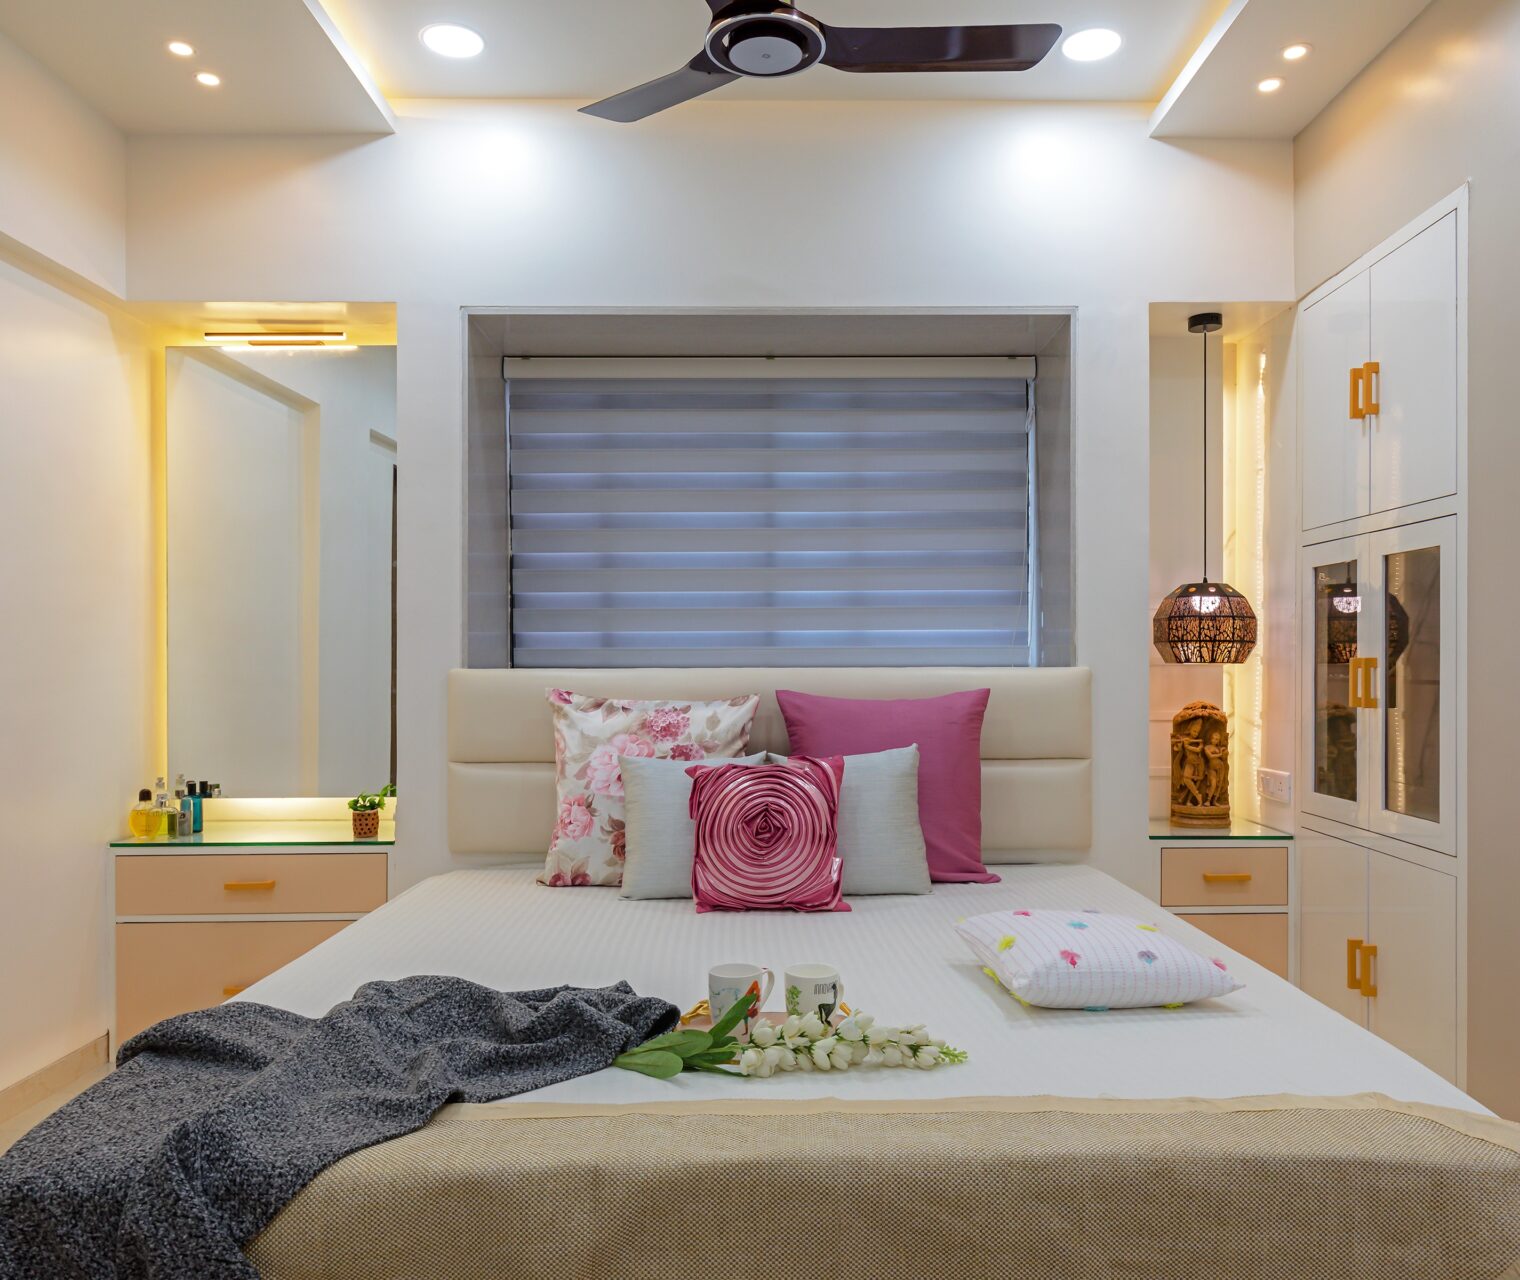 Are You Searching Interior Designing Company in Pune?